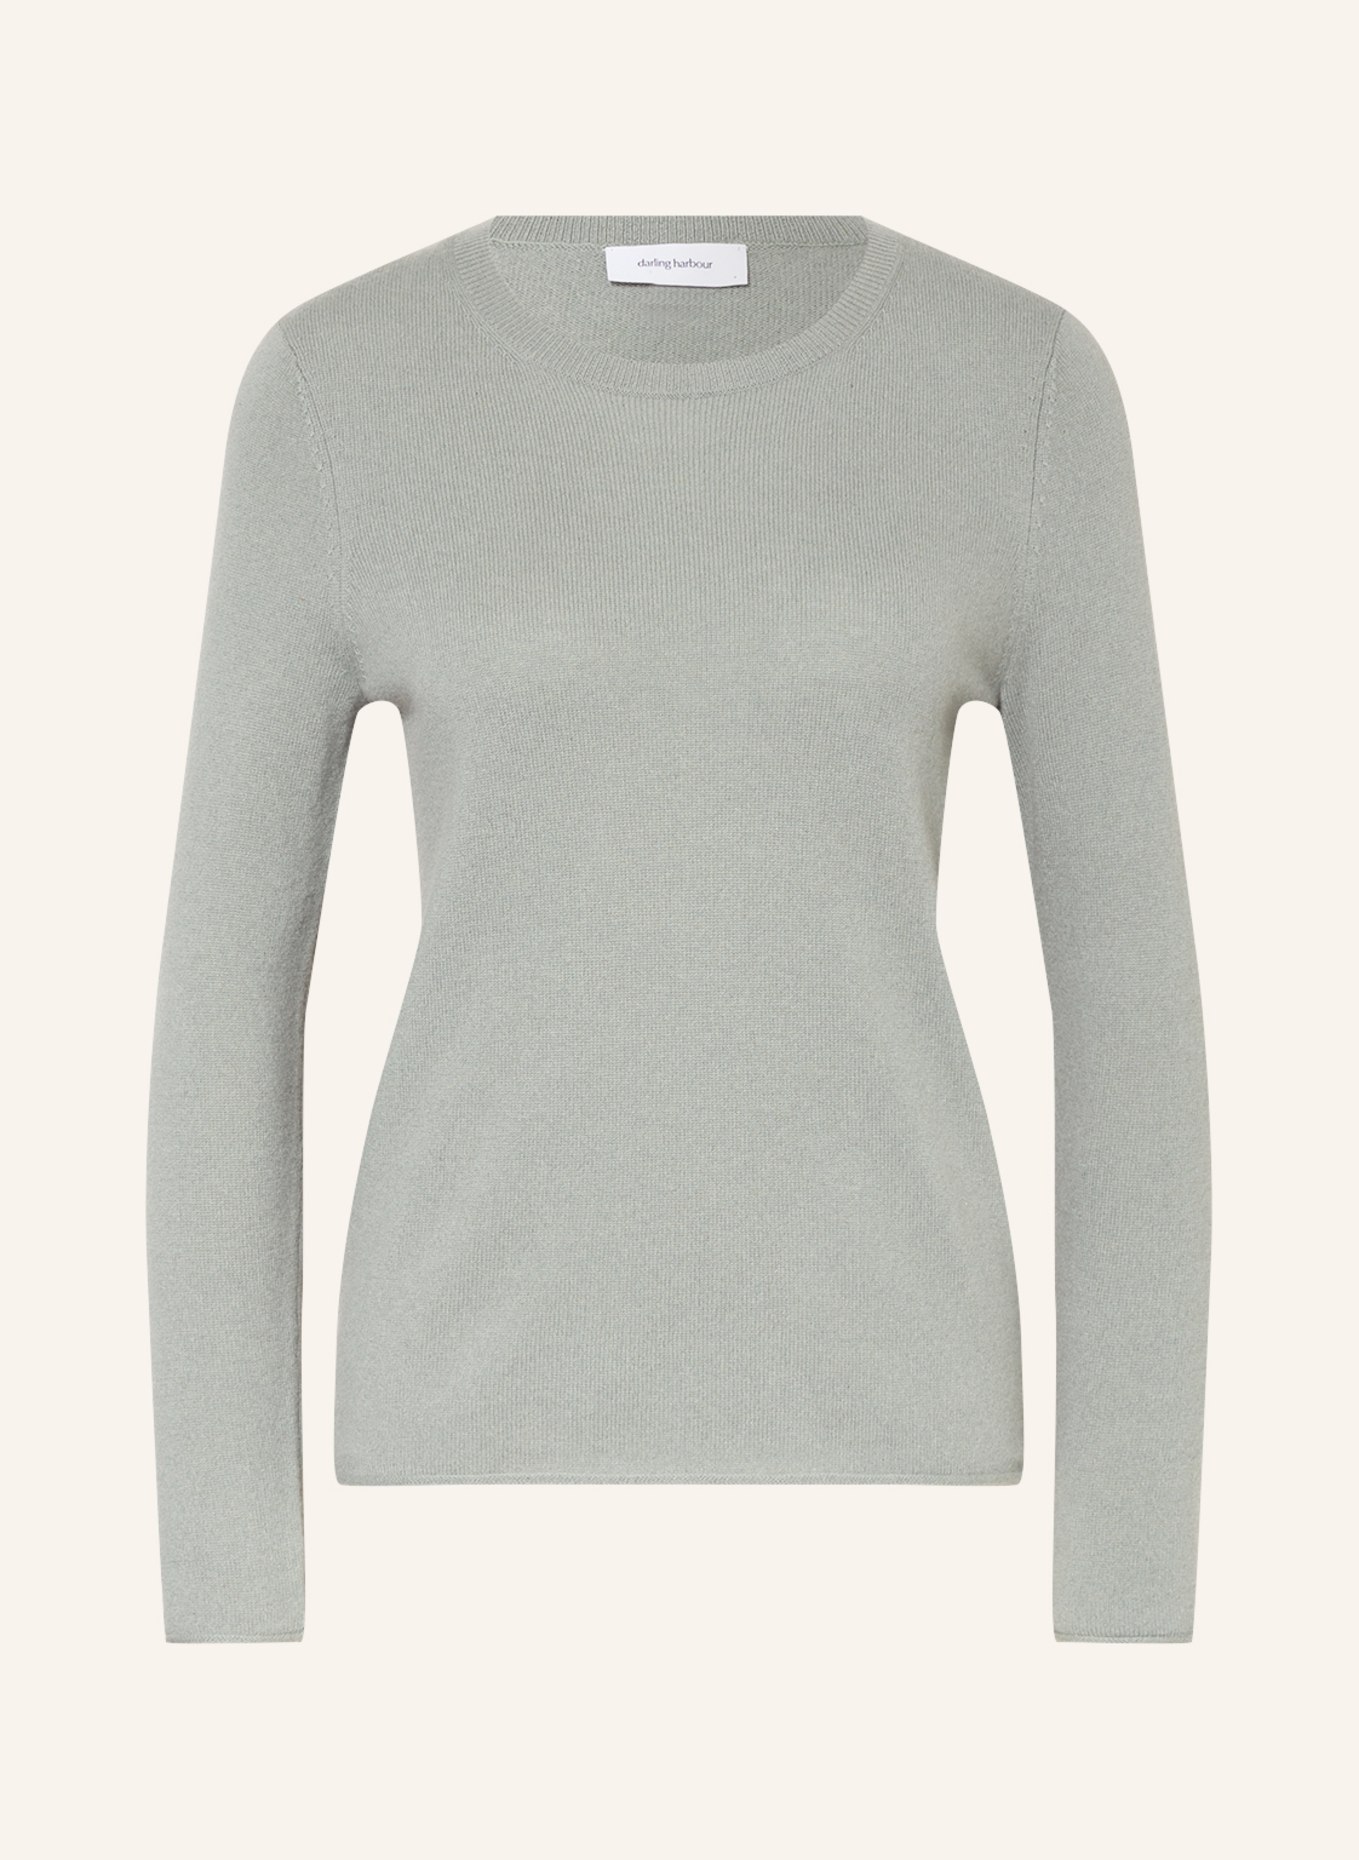 darling harbour Cashmere sweater, Color: MINT (Image 1)